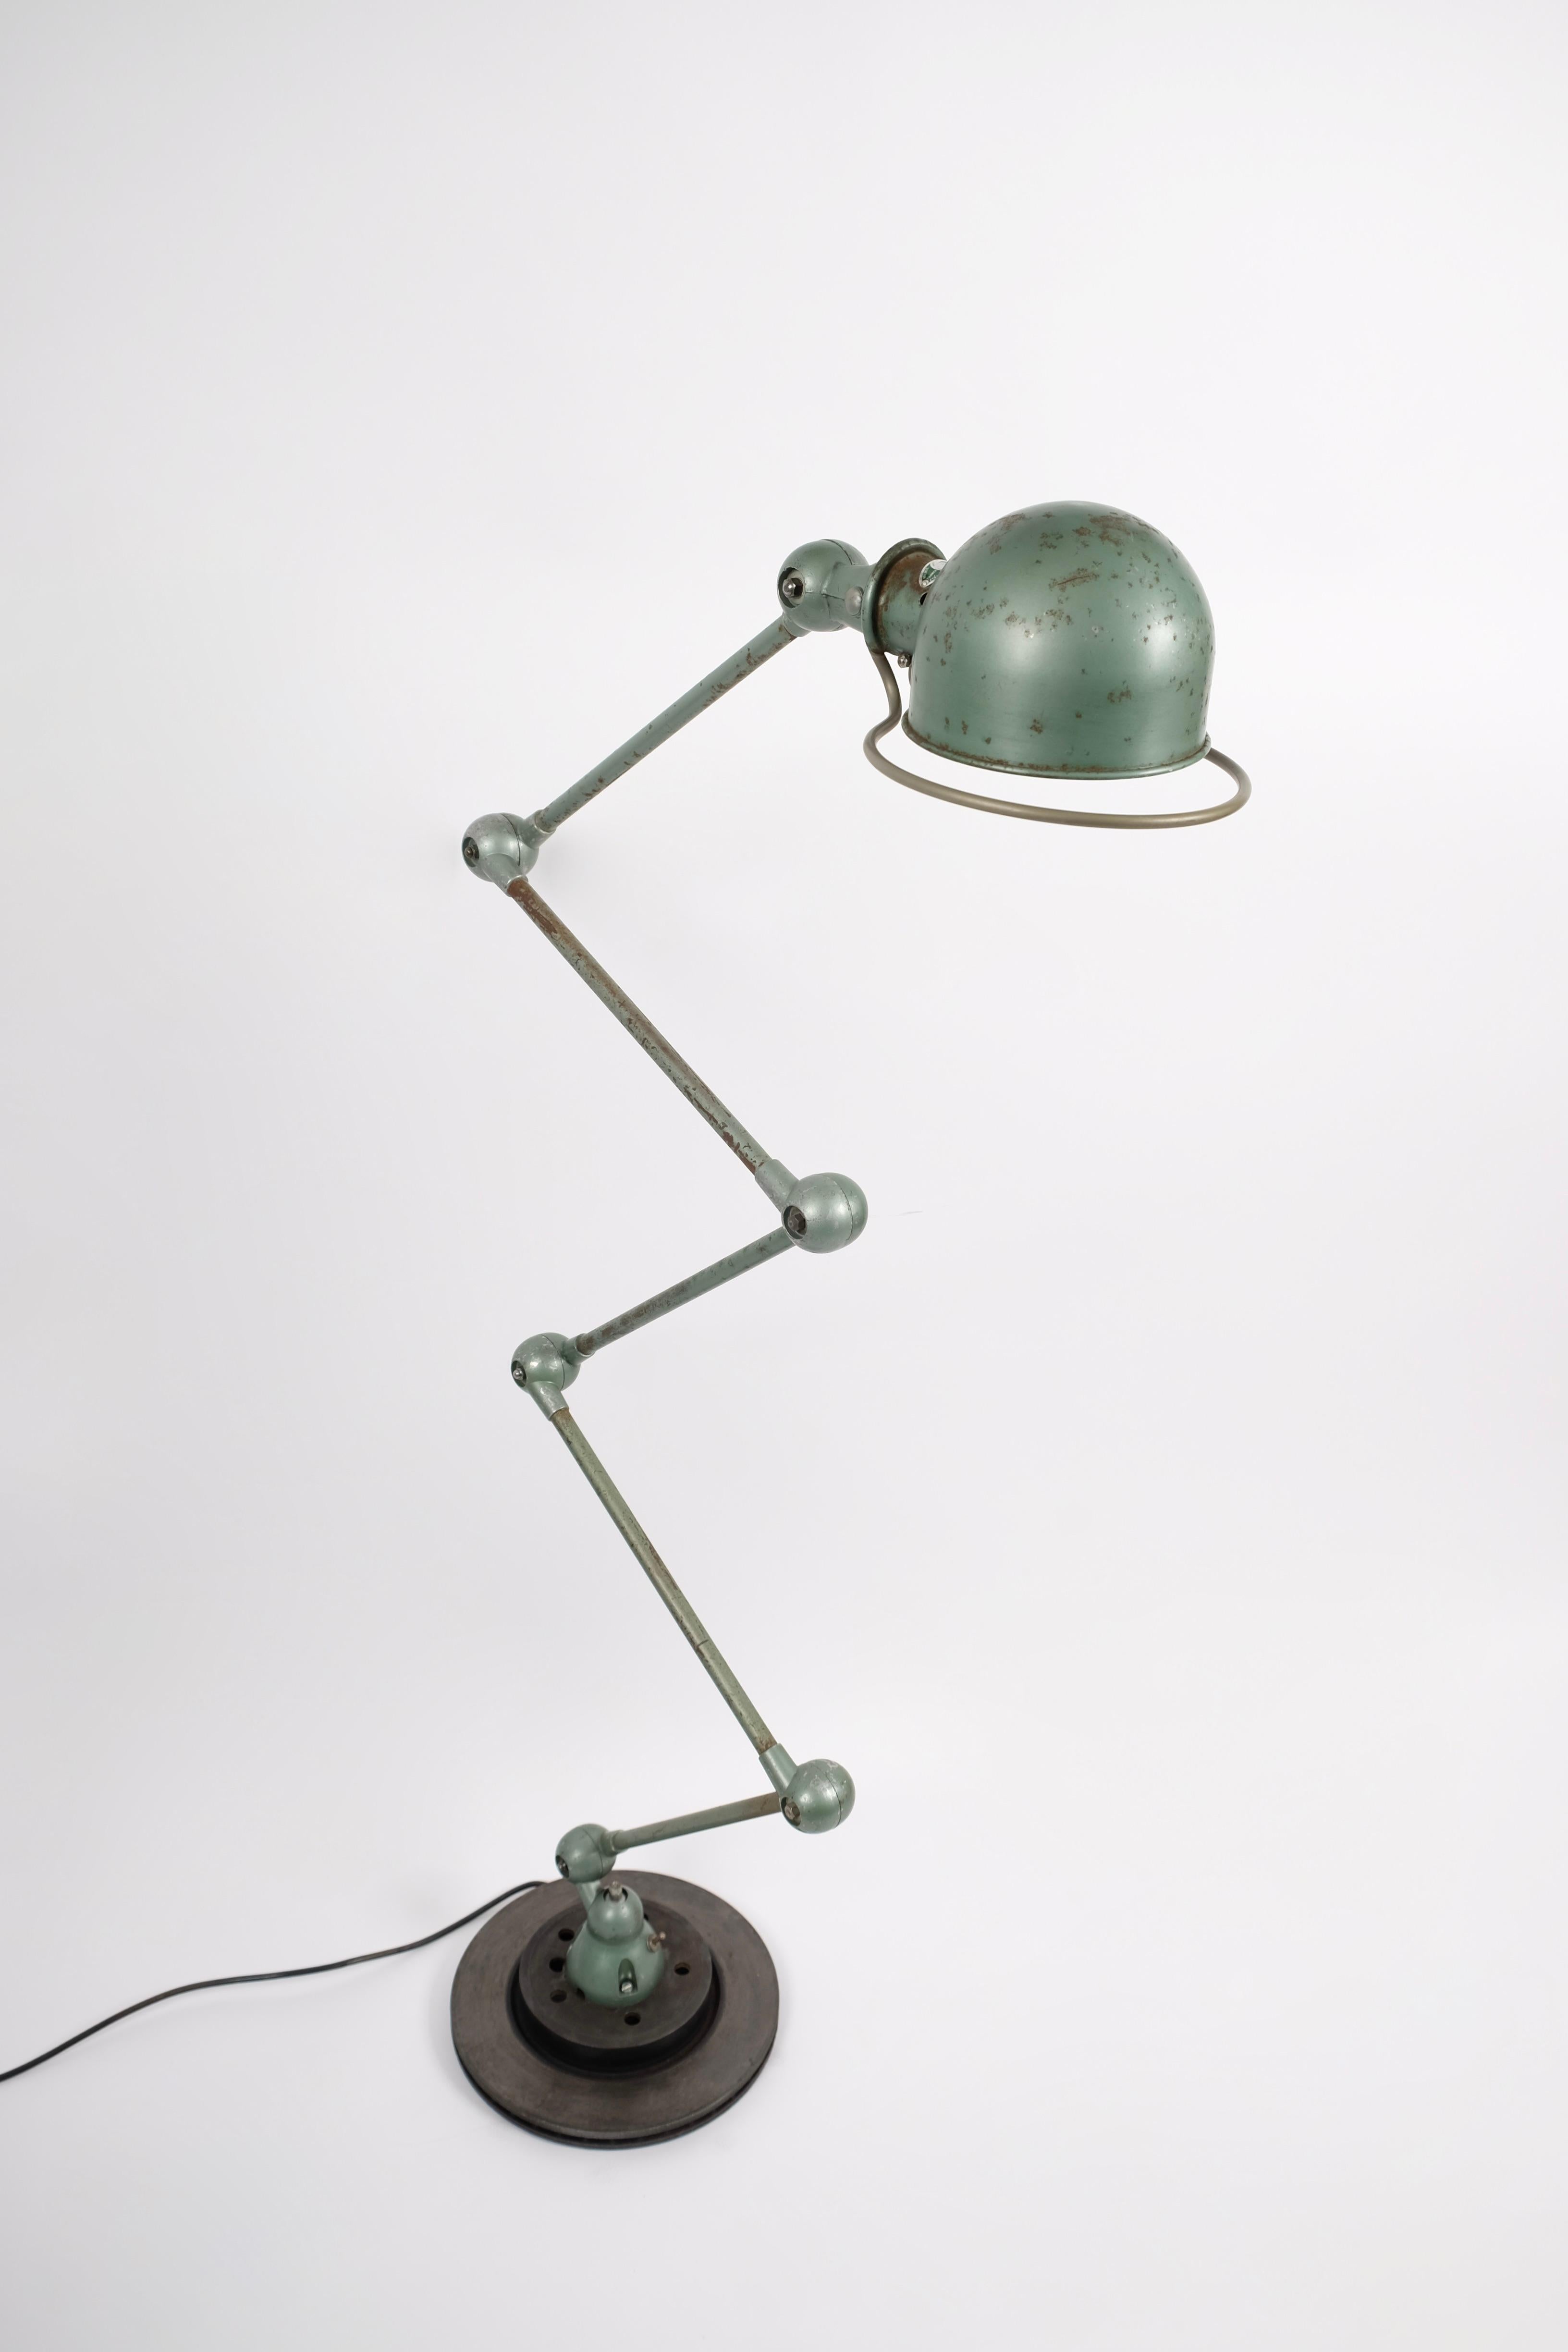 Beauitiful industrial Jieldé 5 arm floor lamp original Vespa green lacquer.
Features a green metal plate from the maker.
Each arm measures 45 cm and can be moved horizontally.
The shade/head pivots 360 degrees around the shade holder.
Mounted on